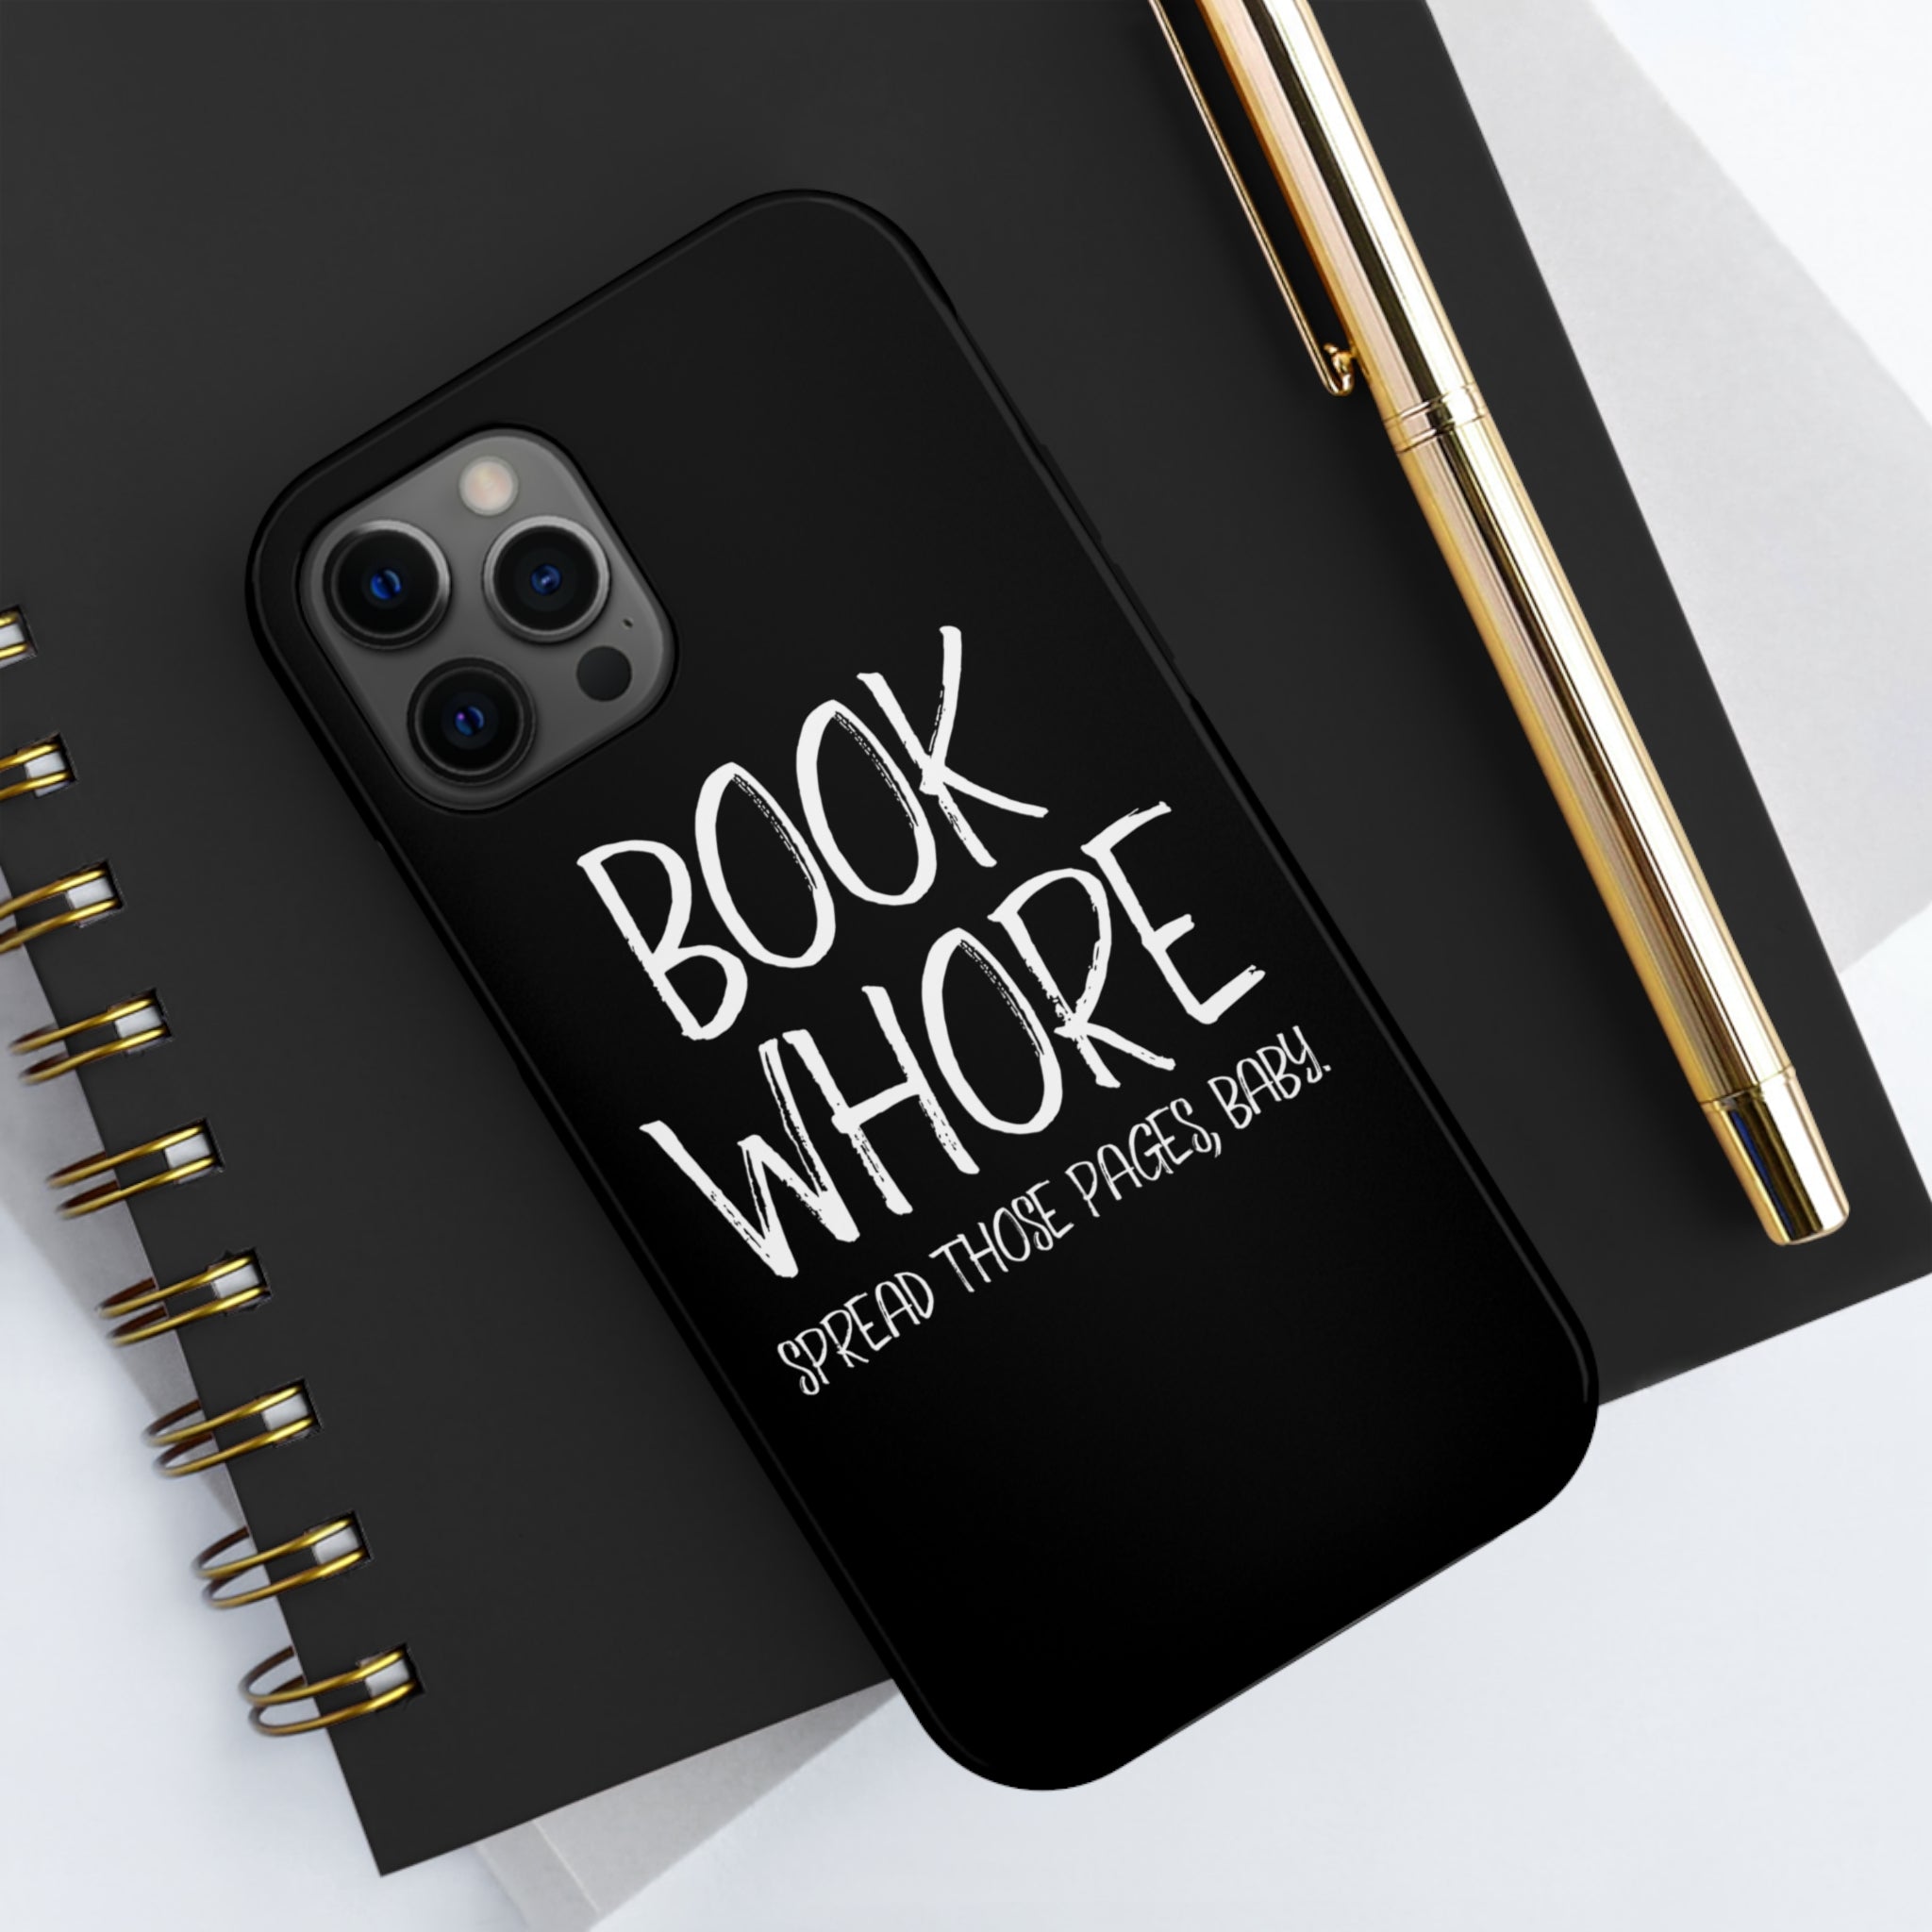 BOOK WH*RE Phone Case - Literary Lifestyle Company